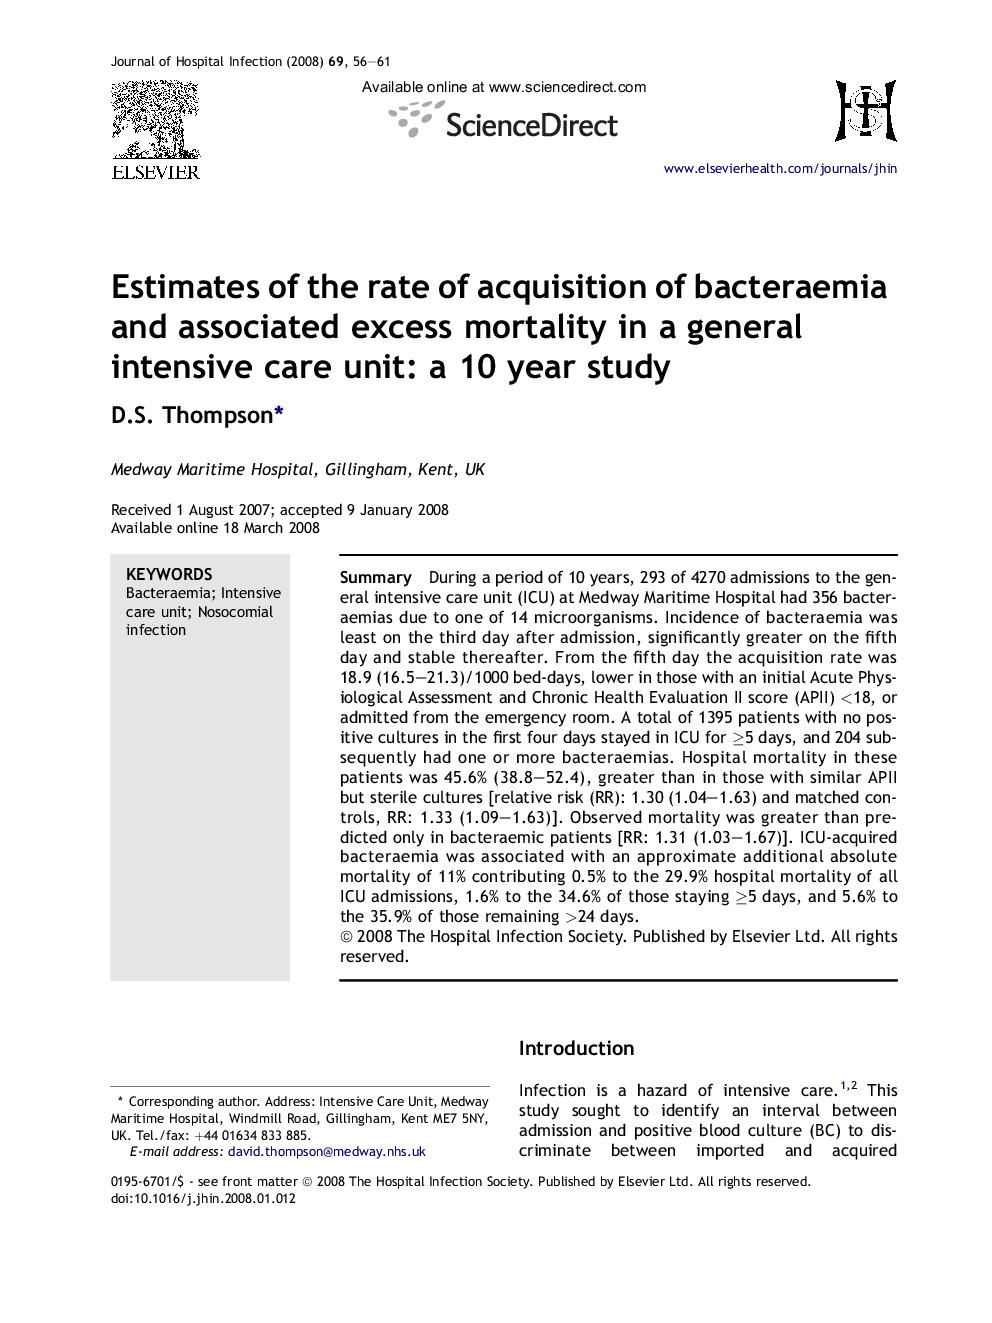 Estimates of the rate of acquisition of bacteraemia and associated excess mortality in a general intensive care unit: a 10 year study